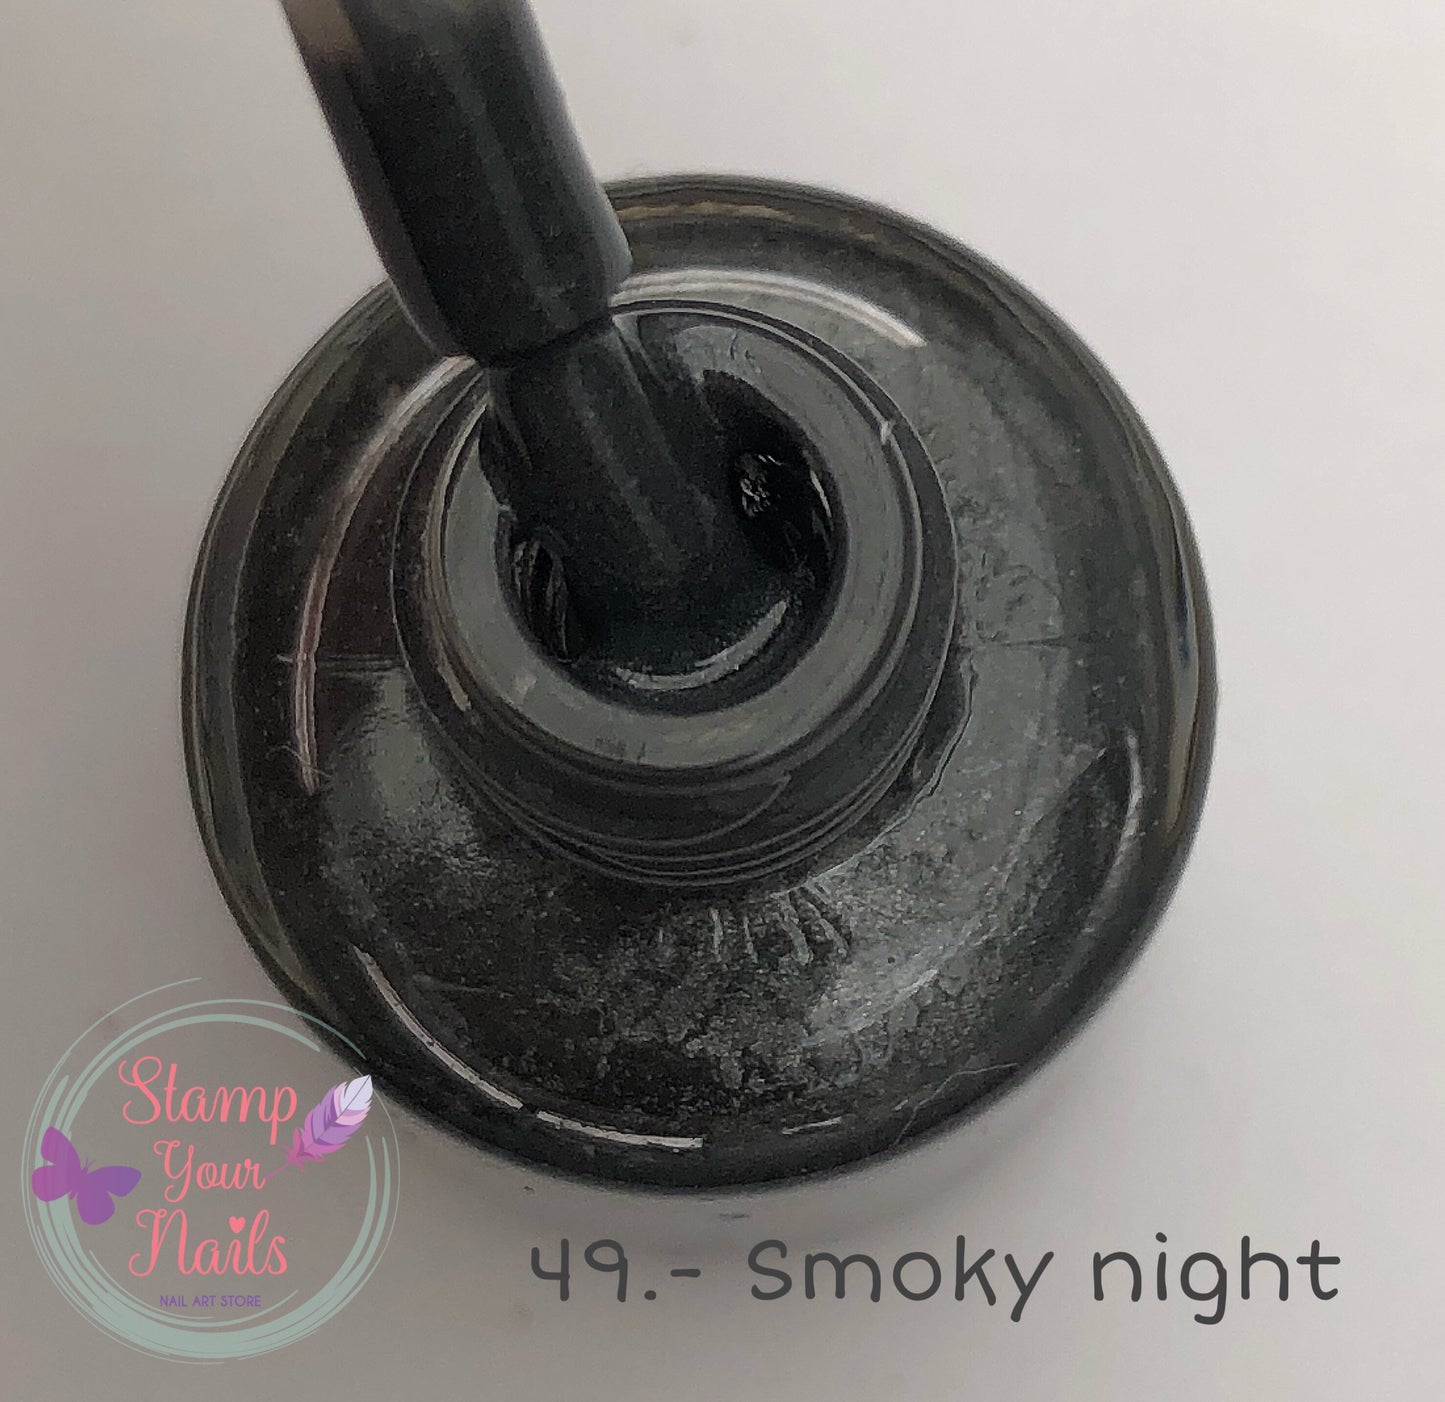 49 Smoky Night - Stamp your nails